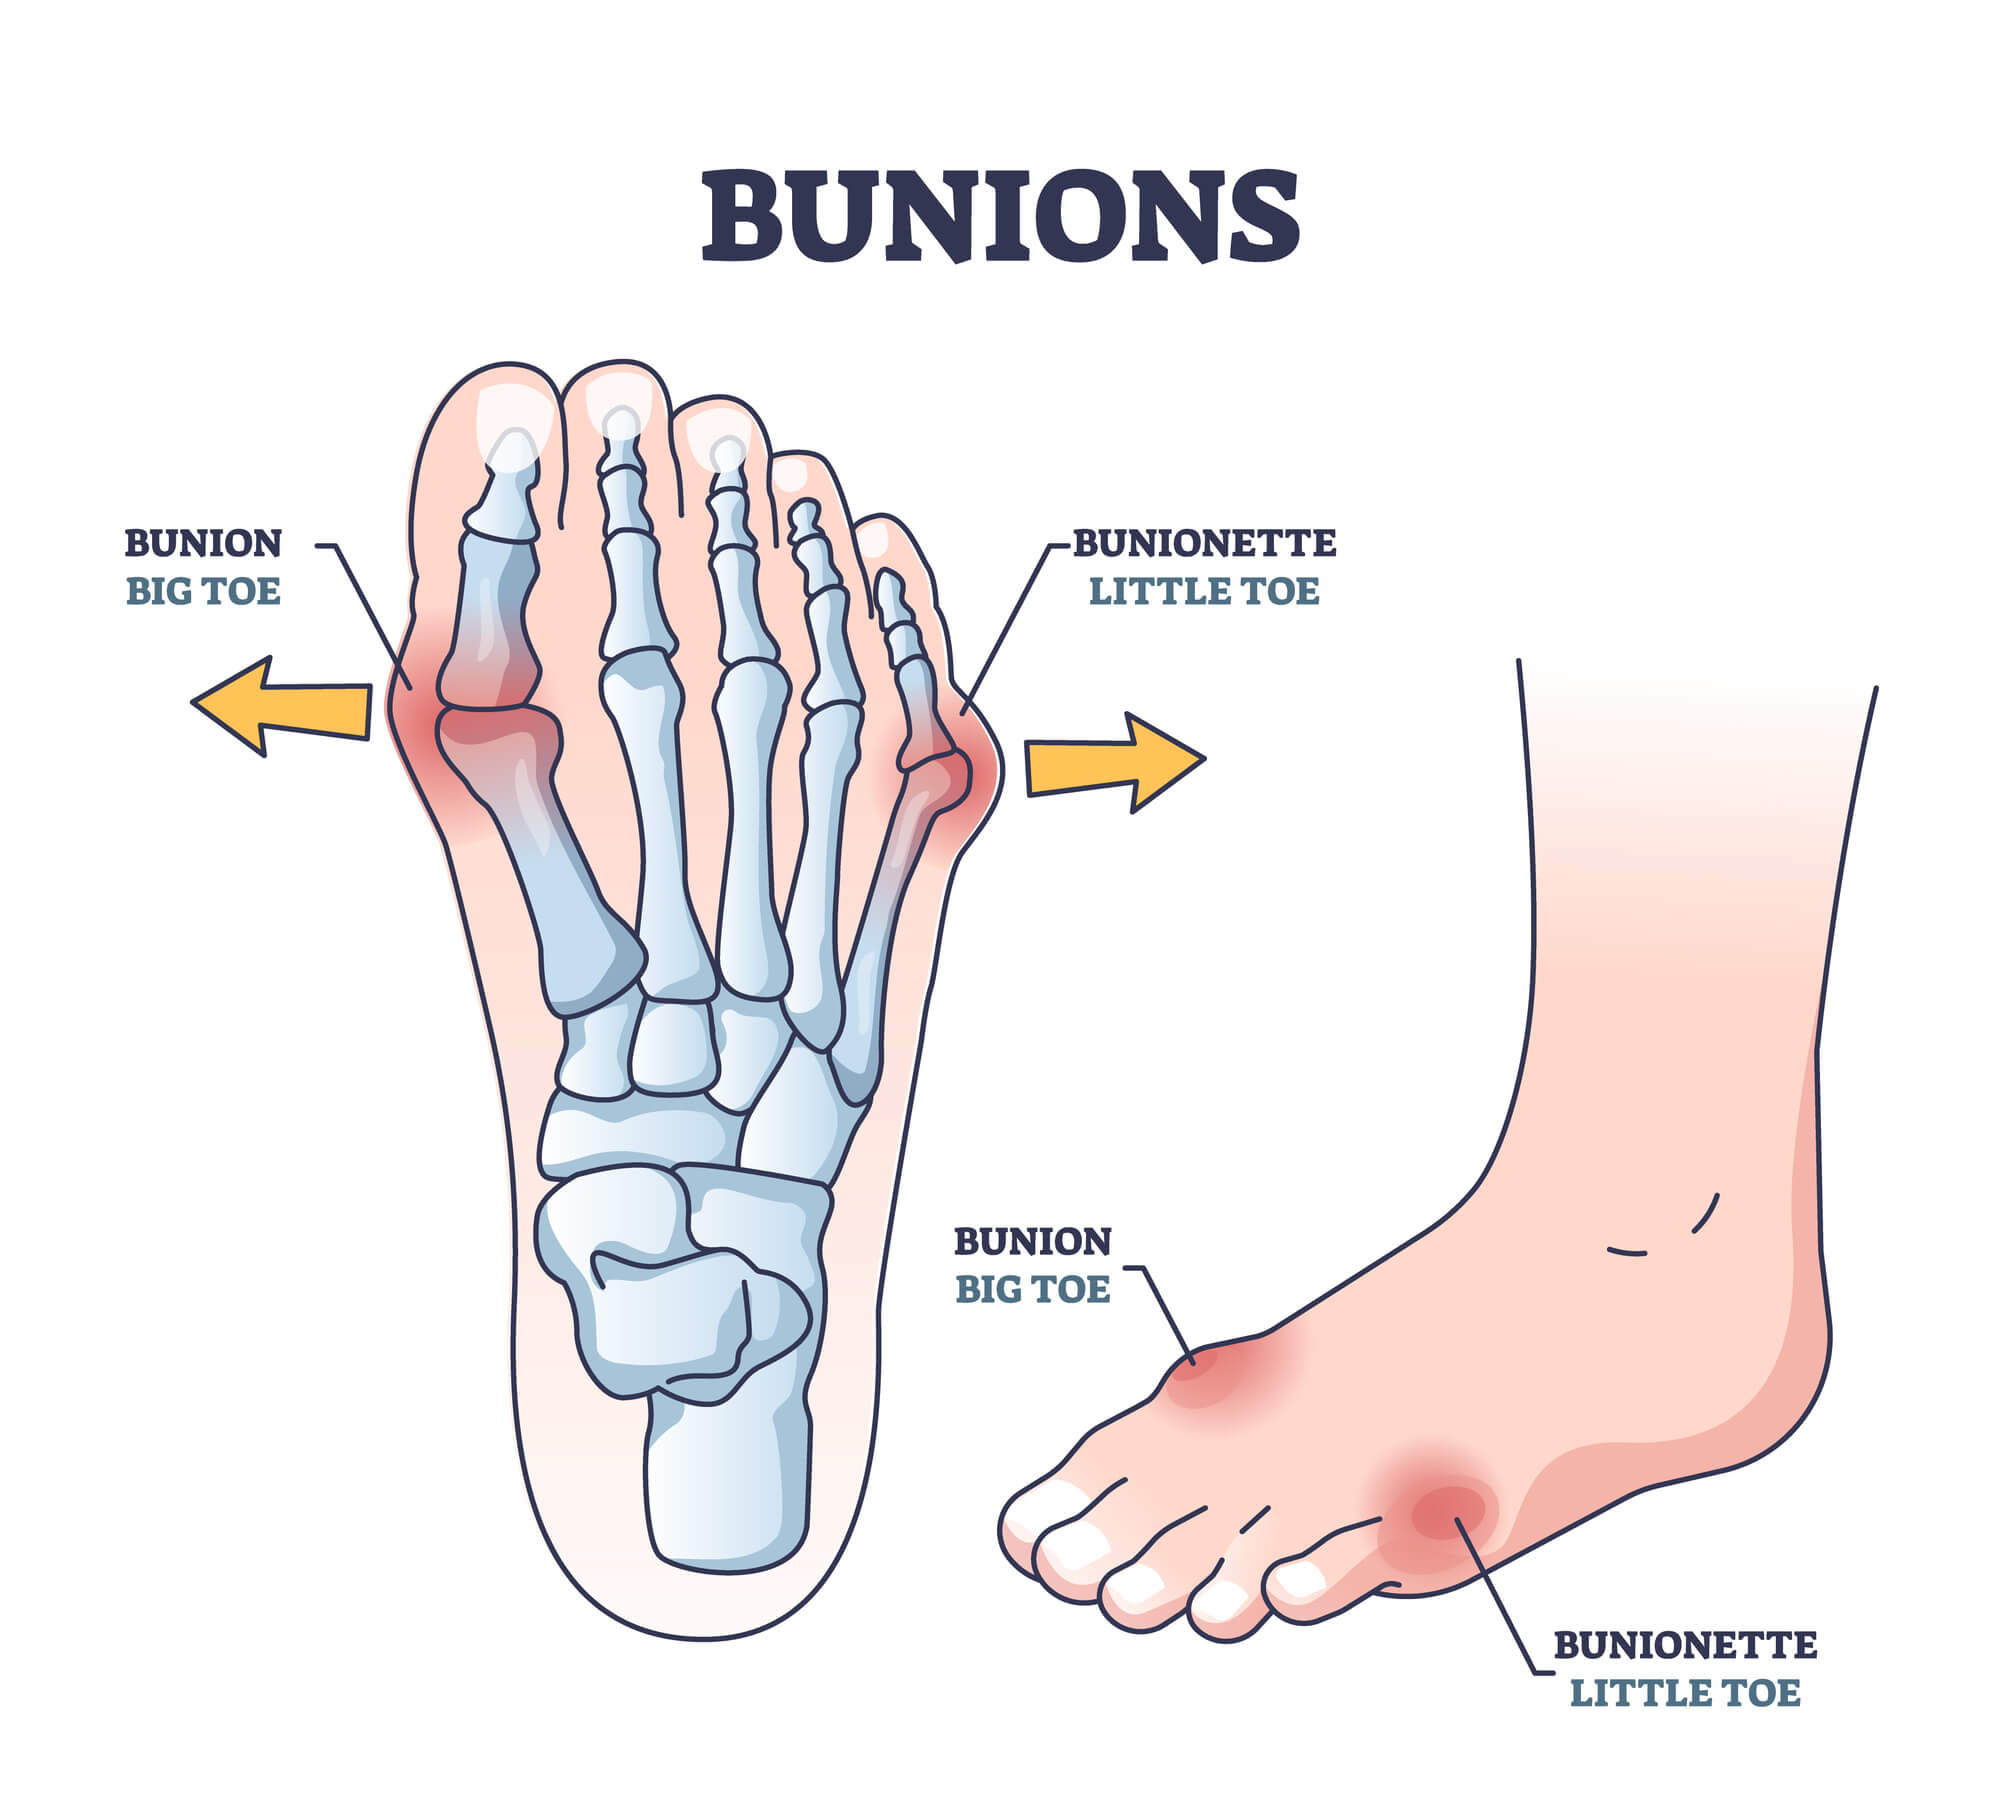 Bunions and bunionette